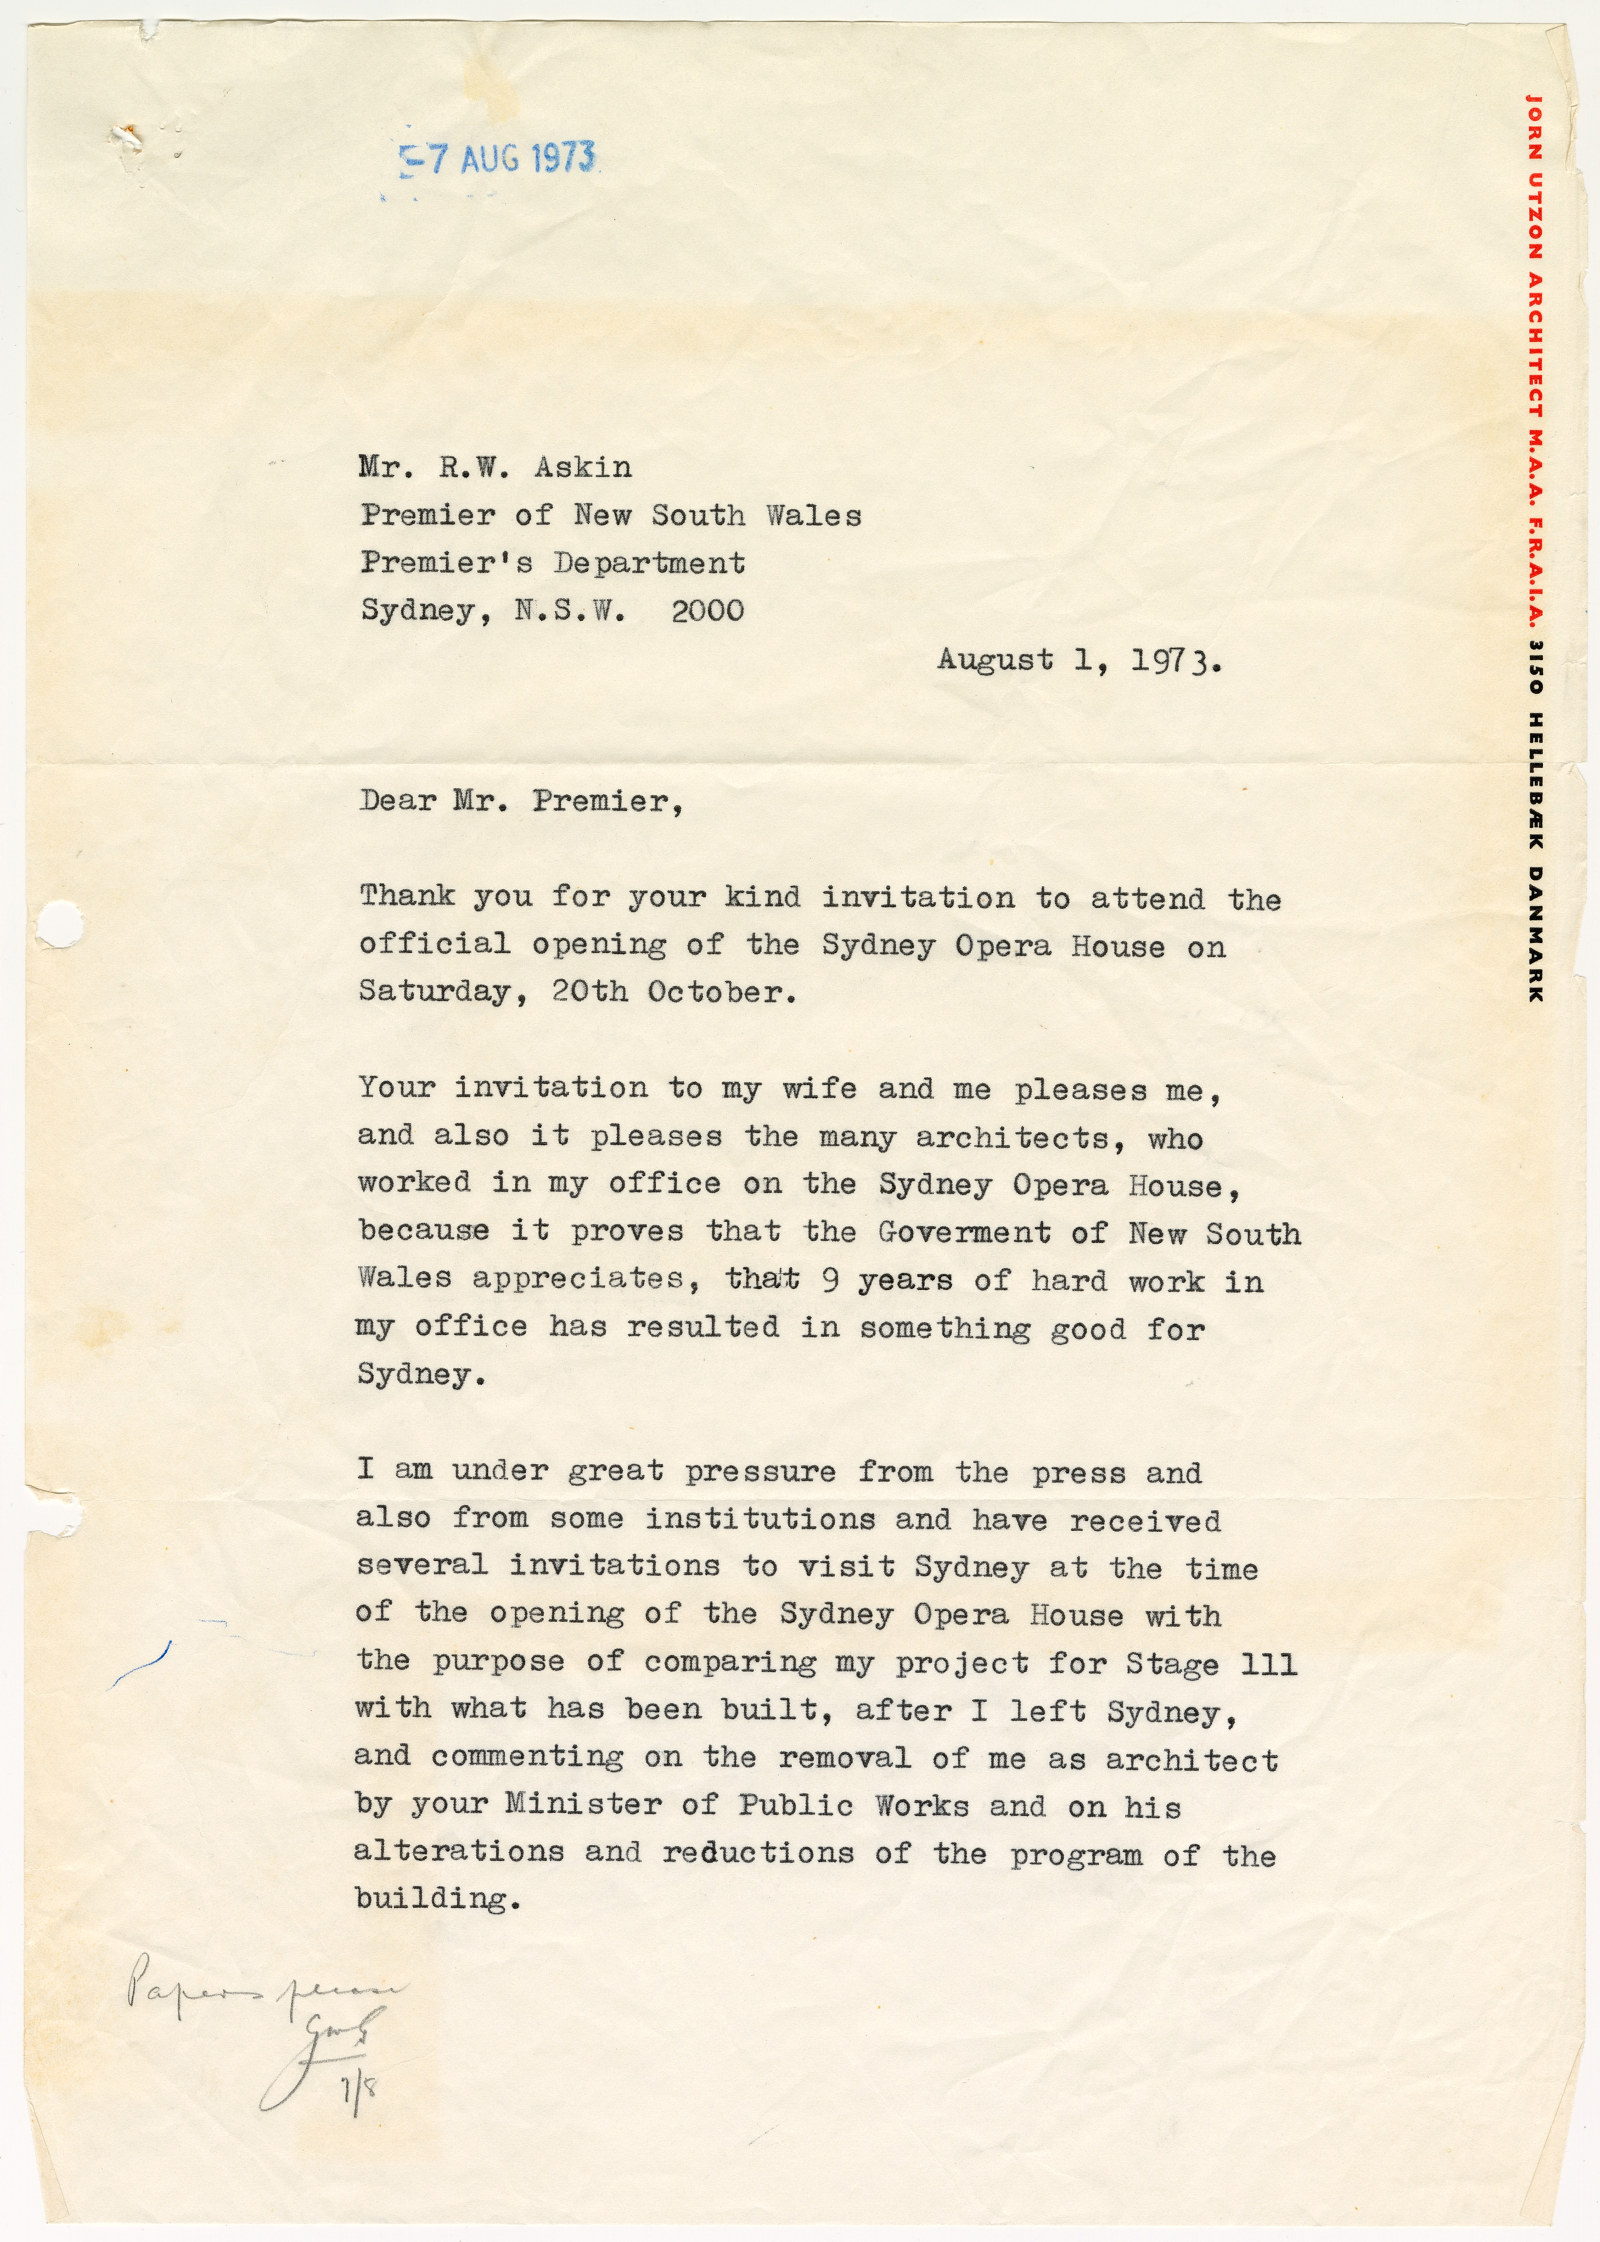 1st page of a letter dated 1st August, 1973, from Jørn Utzon to Premier Askin, declining an invitation for he and his wife Lis to attend the opening of the Sydney Opera House. NRS-12092-52-10-72_1214_001_1 - Premier p1